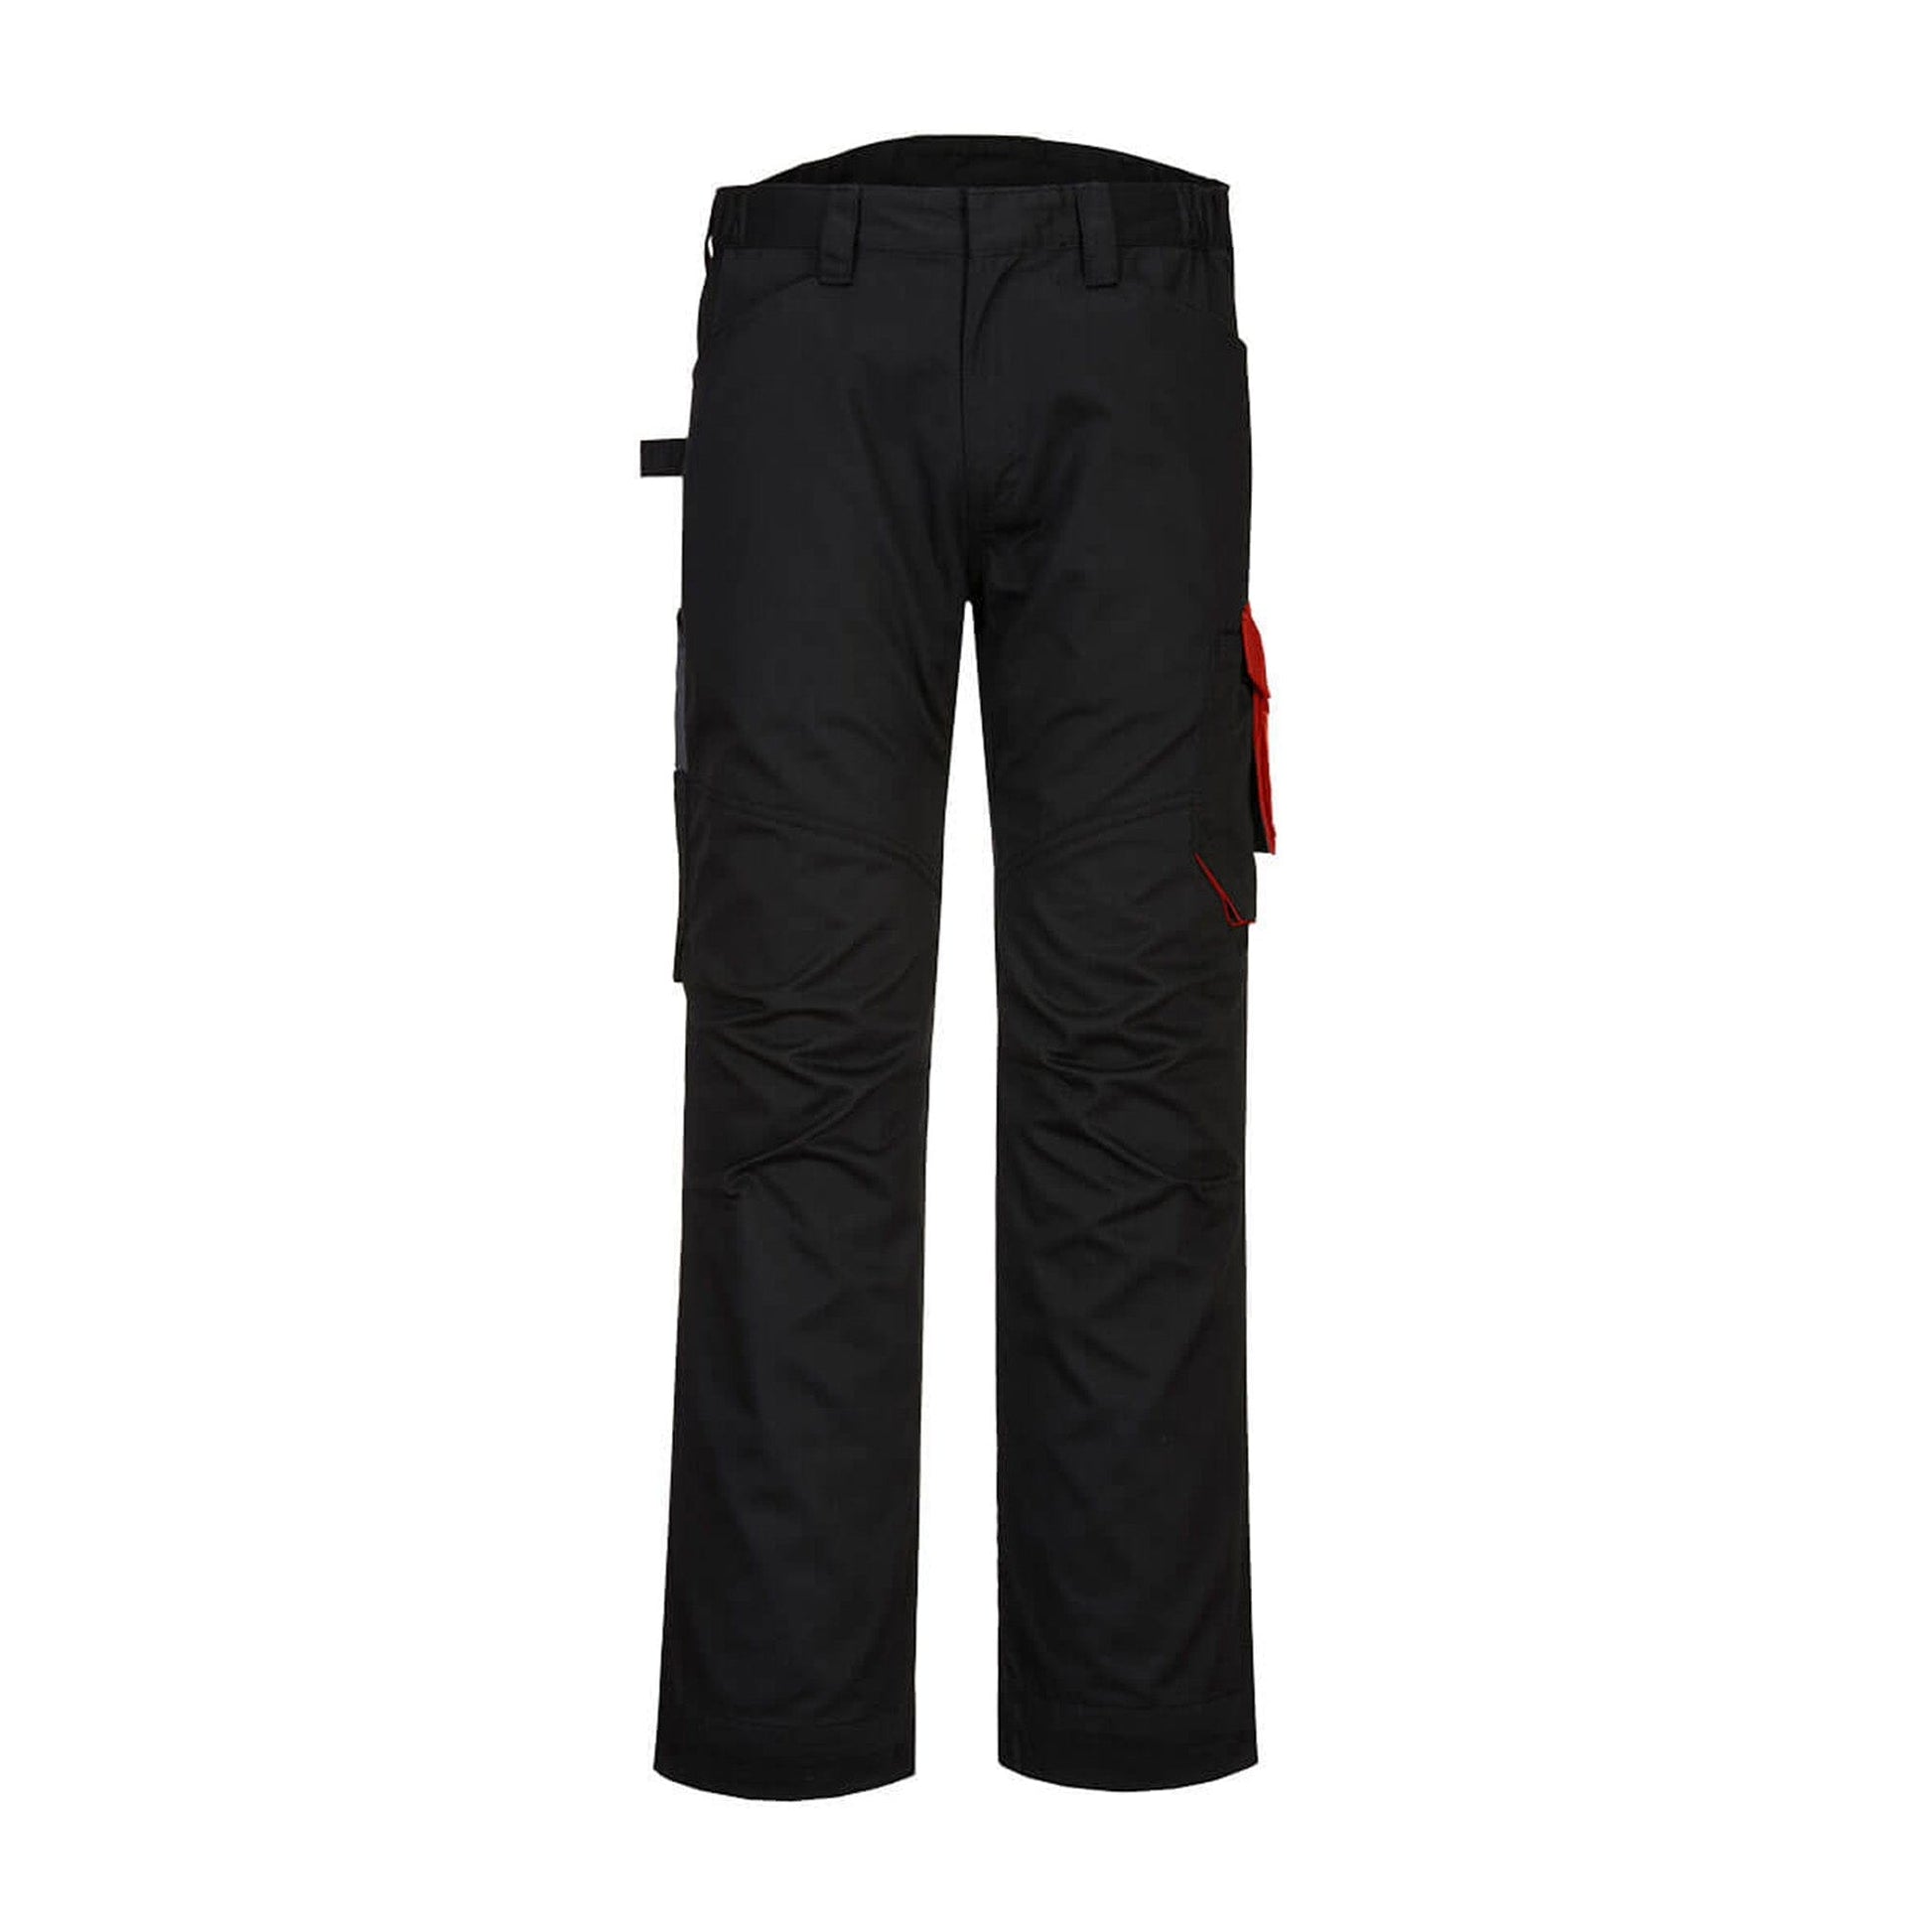 Portwest PW2 Service Trousers PW240 Black/Red